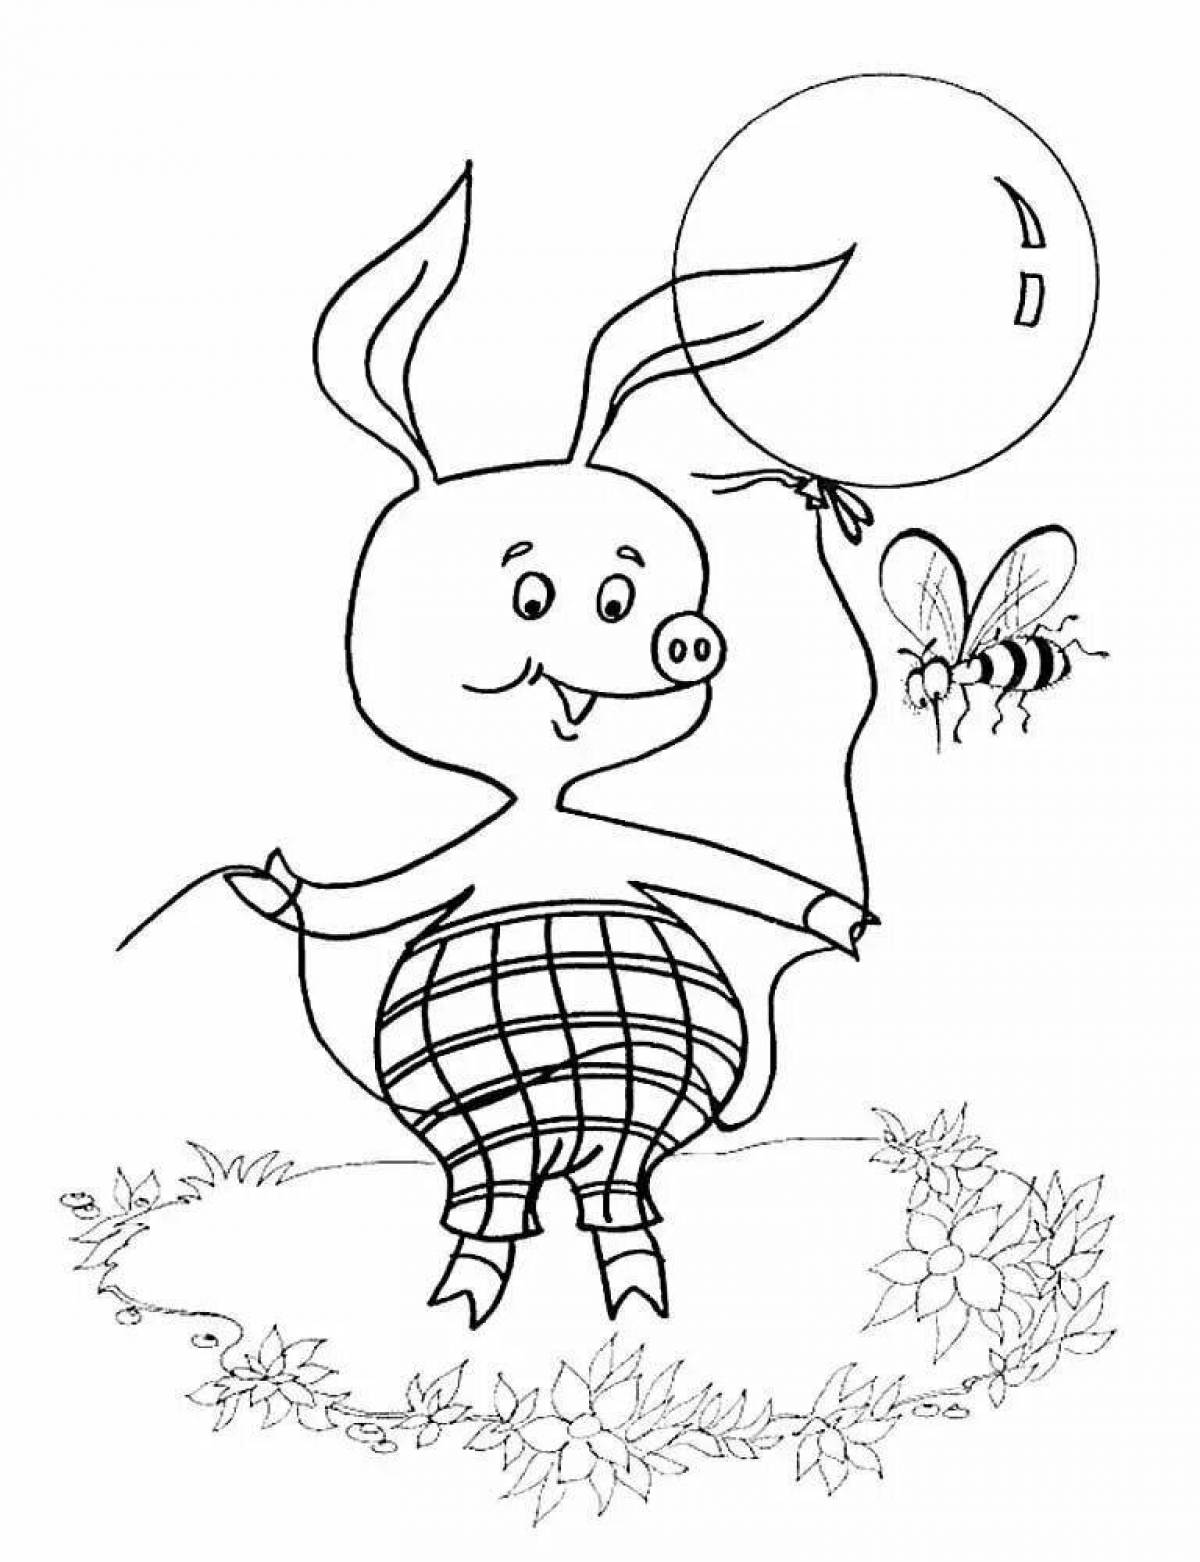 Fantastic fairy tale character coloring pages